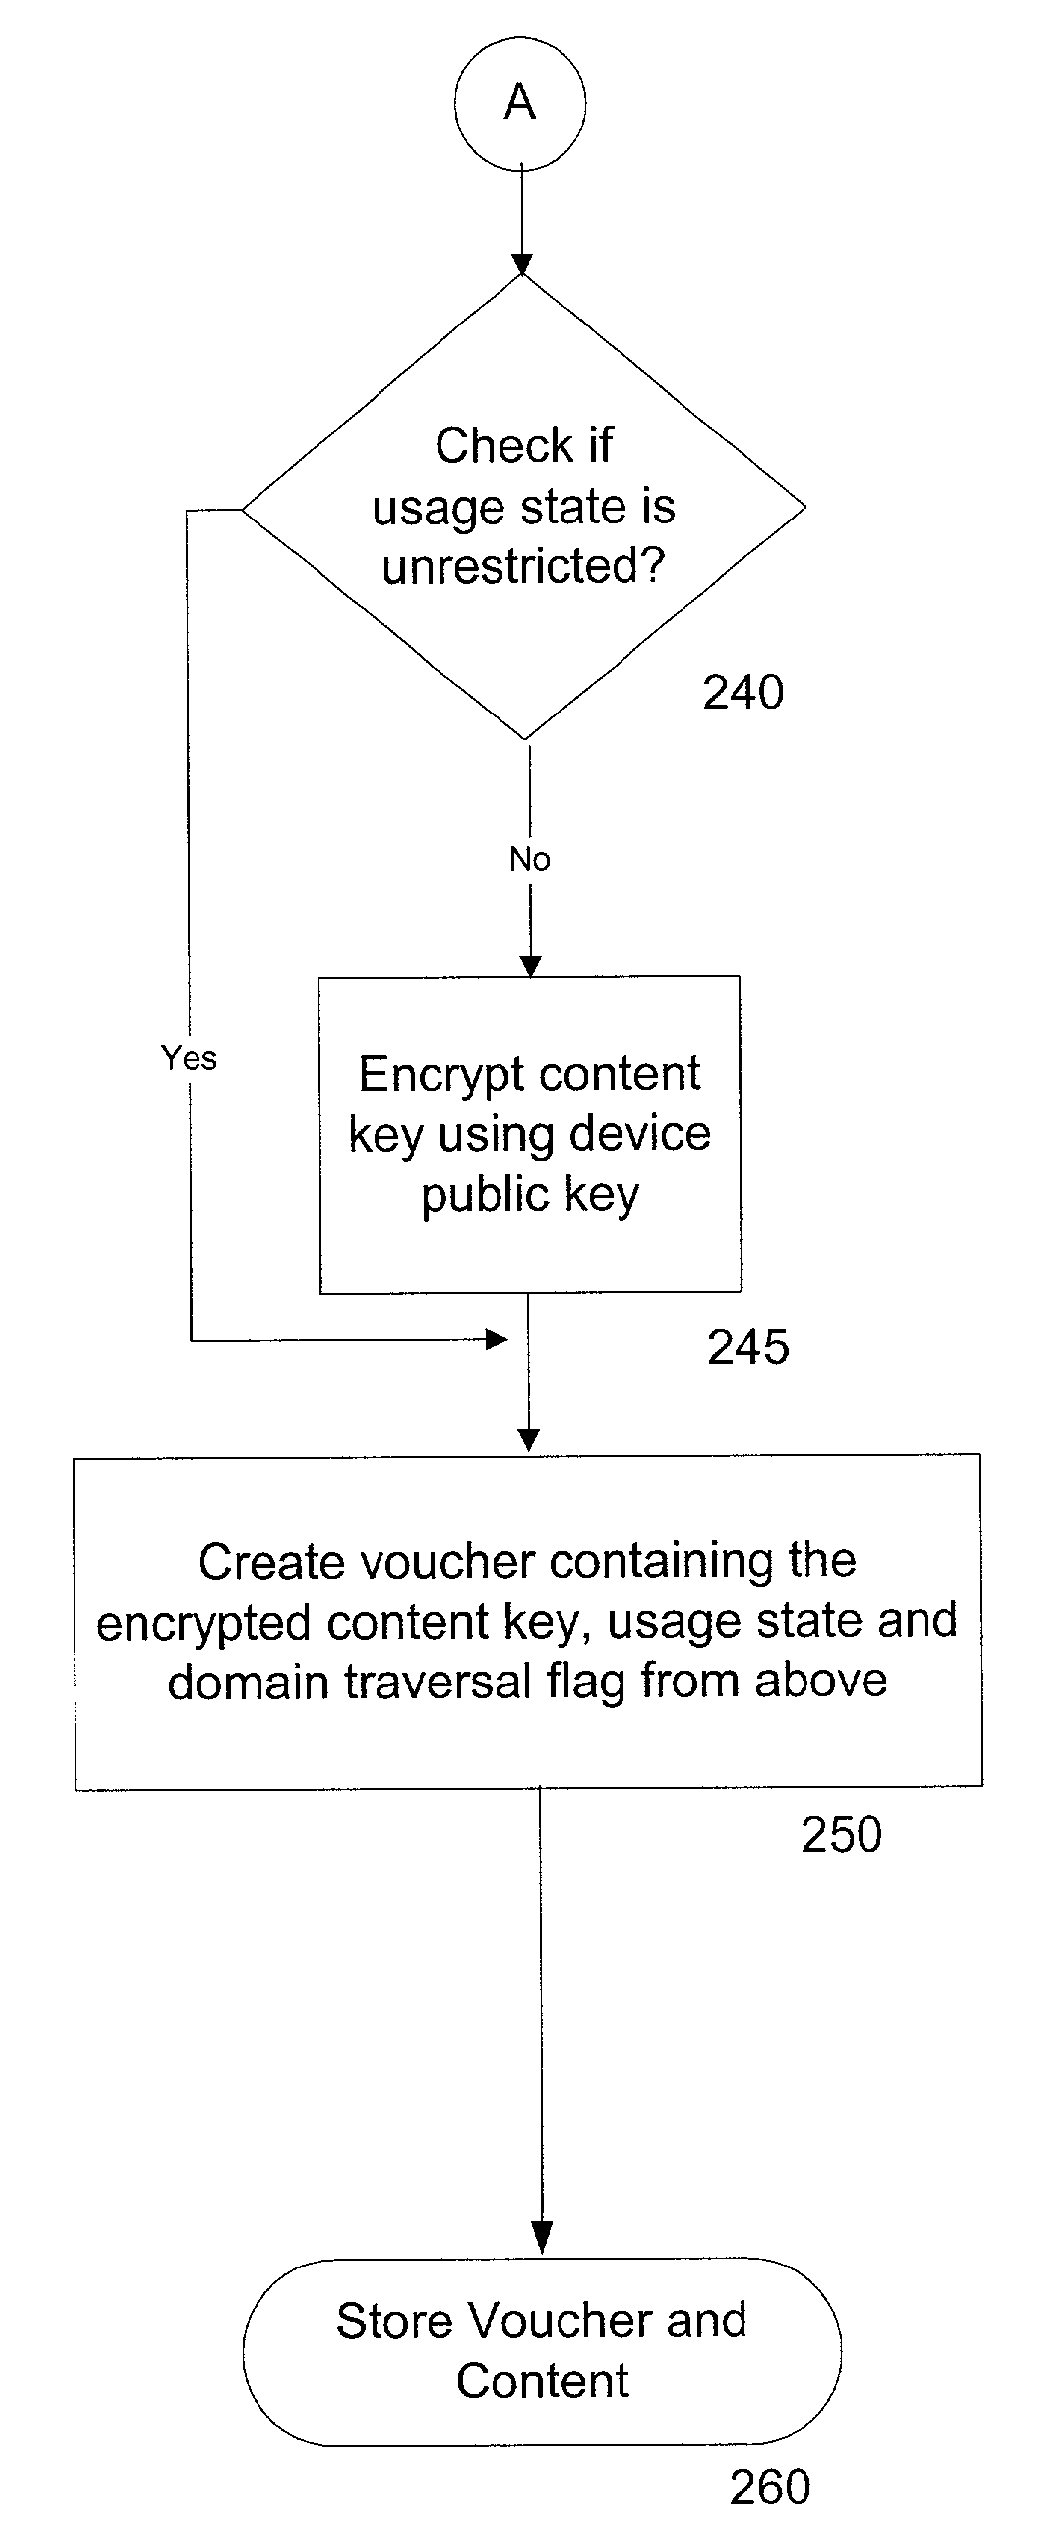 System and method for controlled copying and moving of content between devices and domains based on conditional encryption of content key depending on usage state